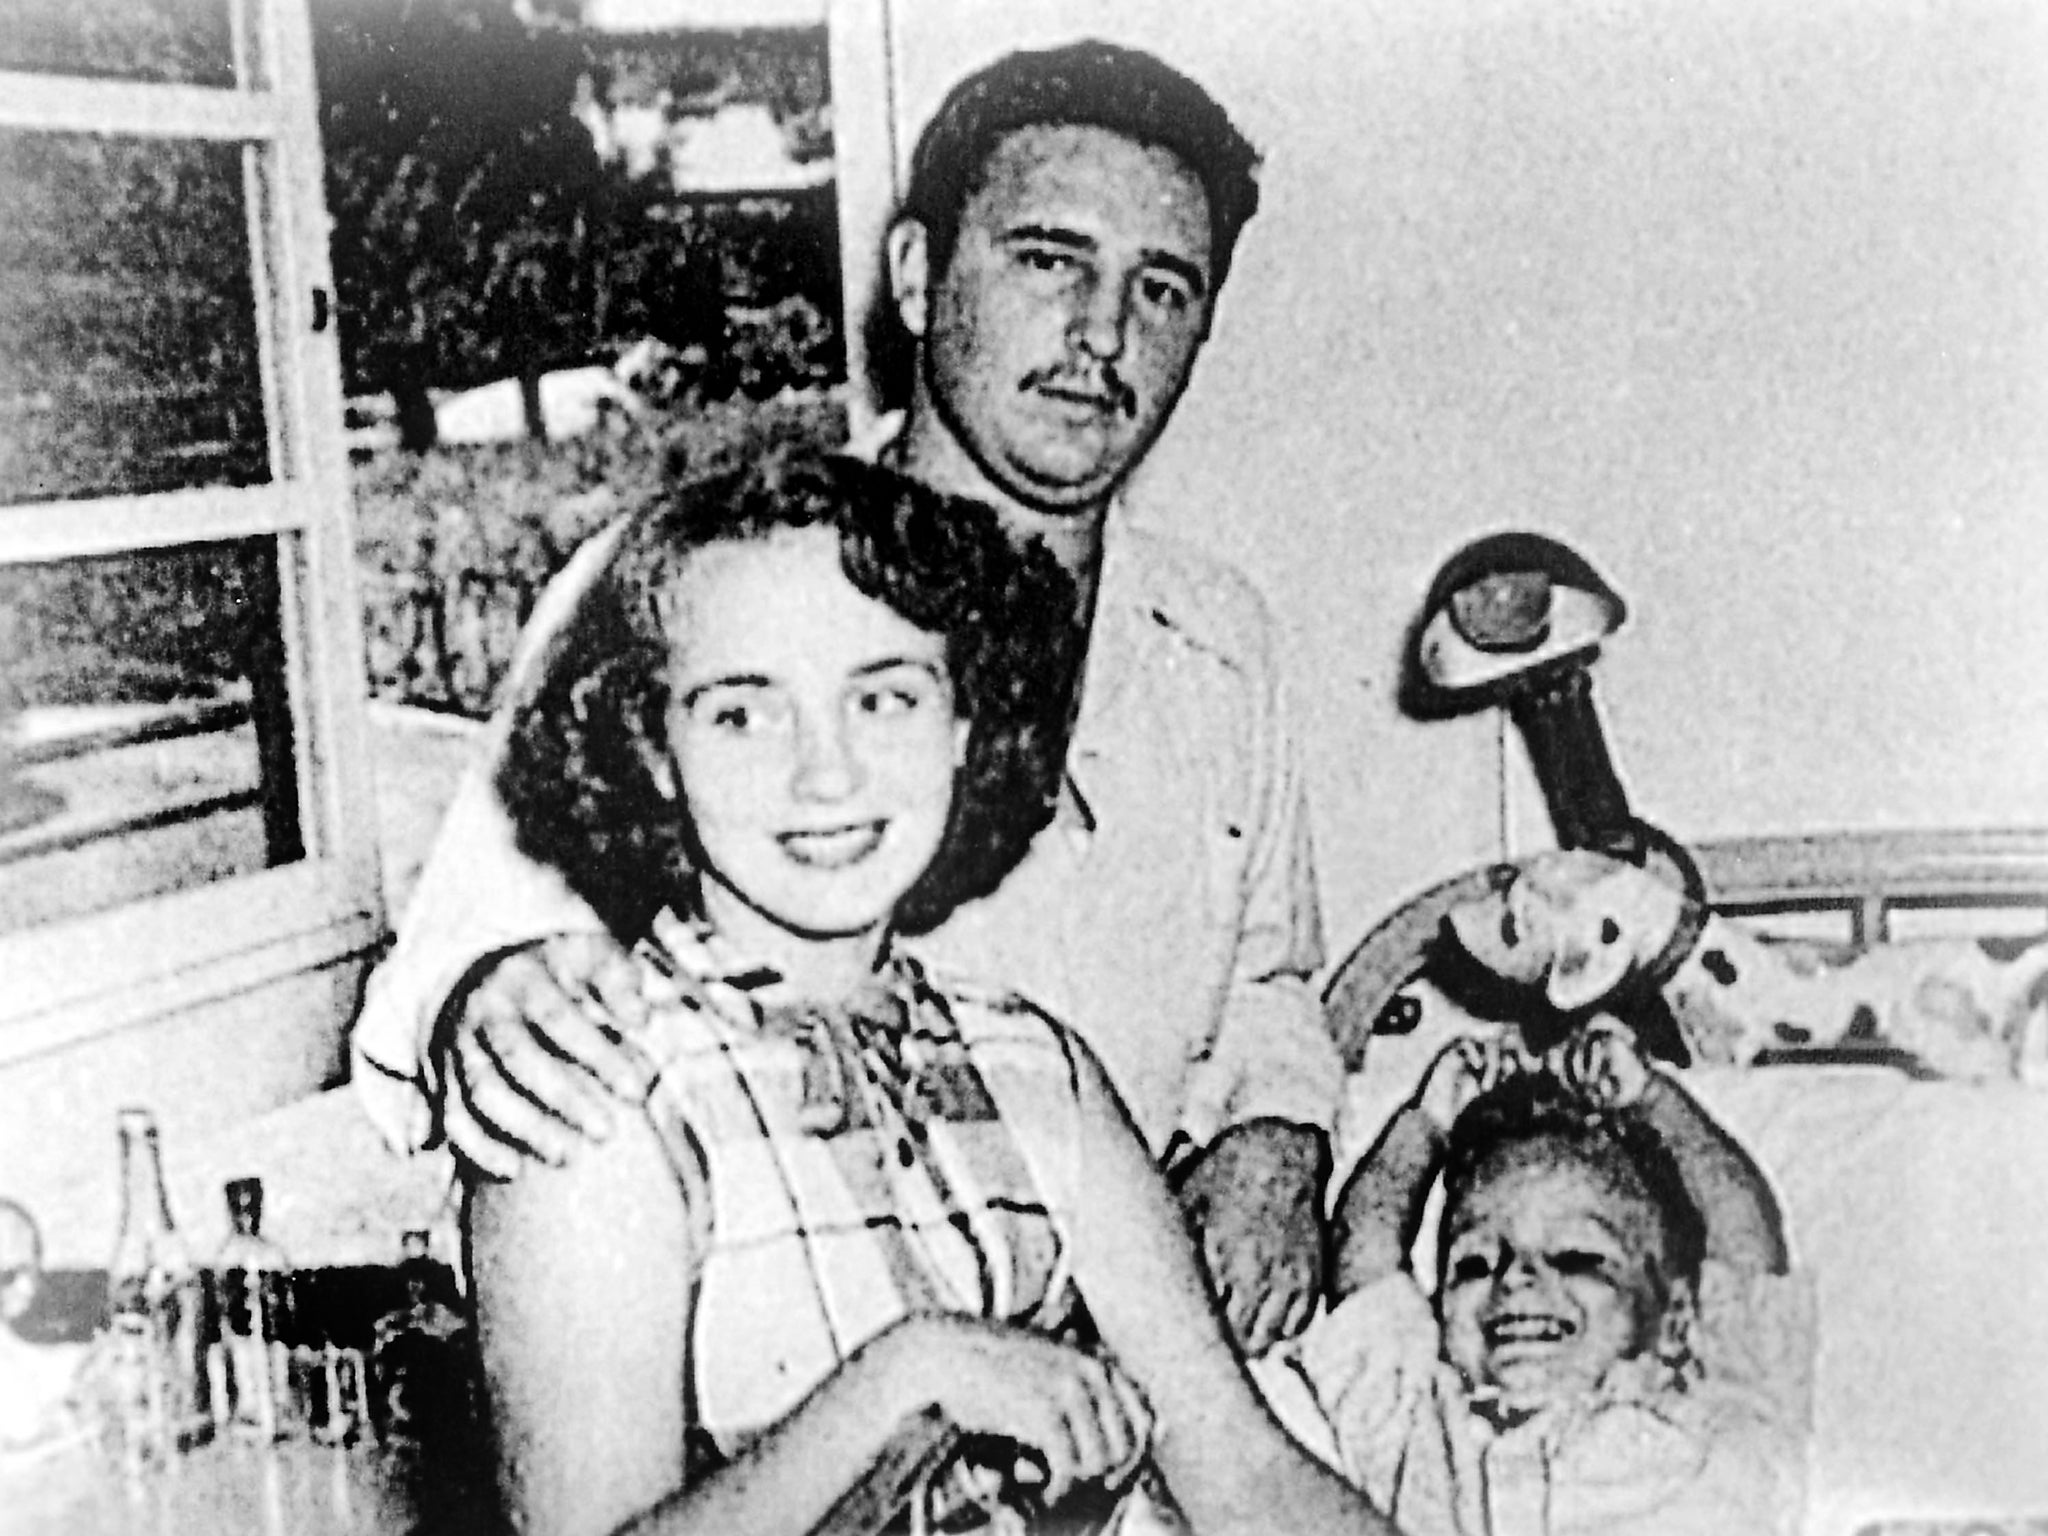 Castro with his first wife Mirta and his son Fidelito